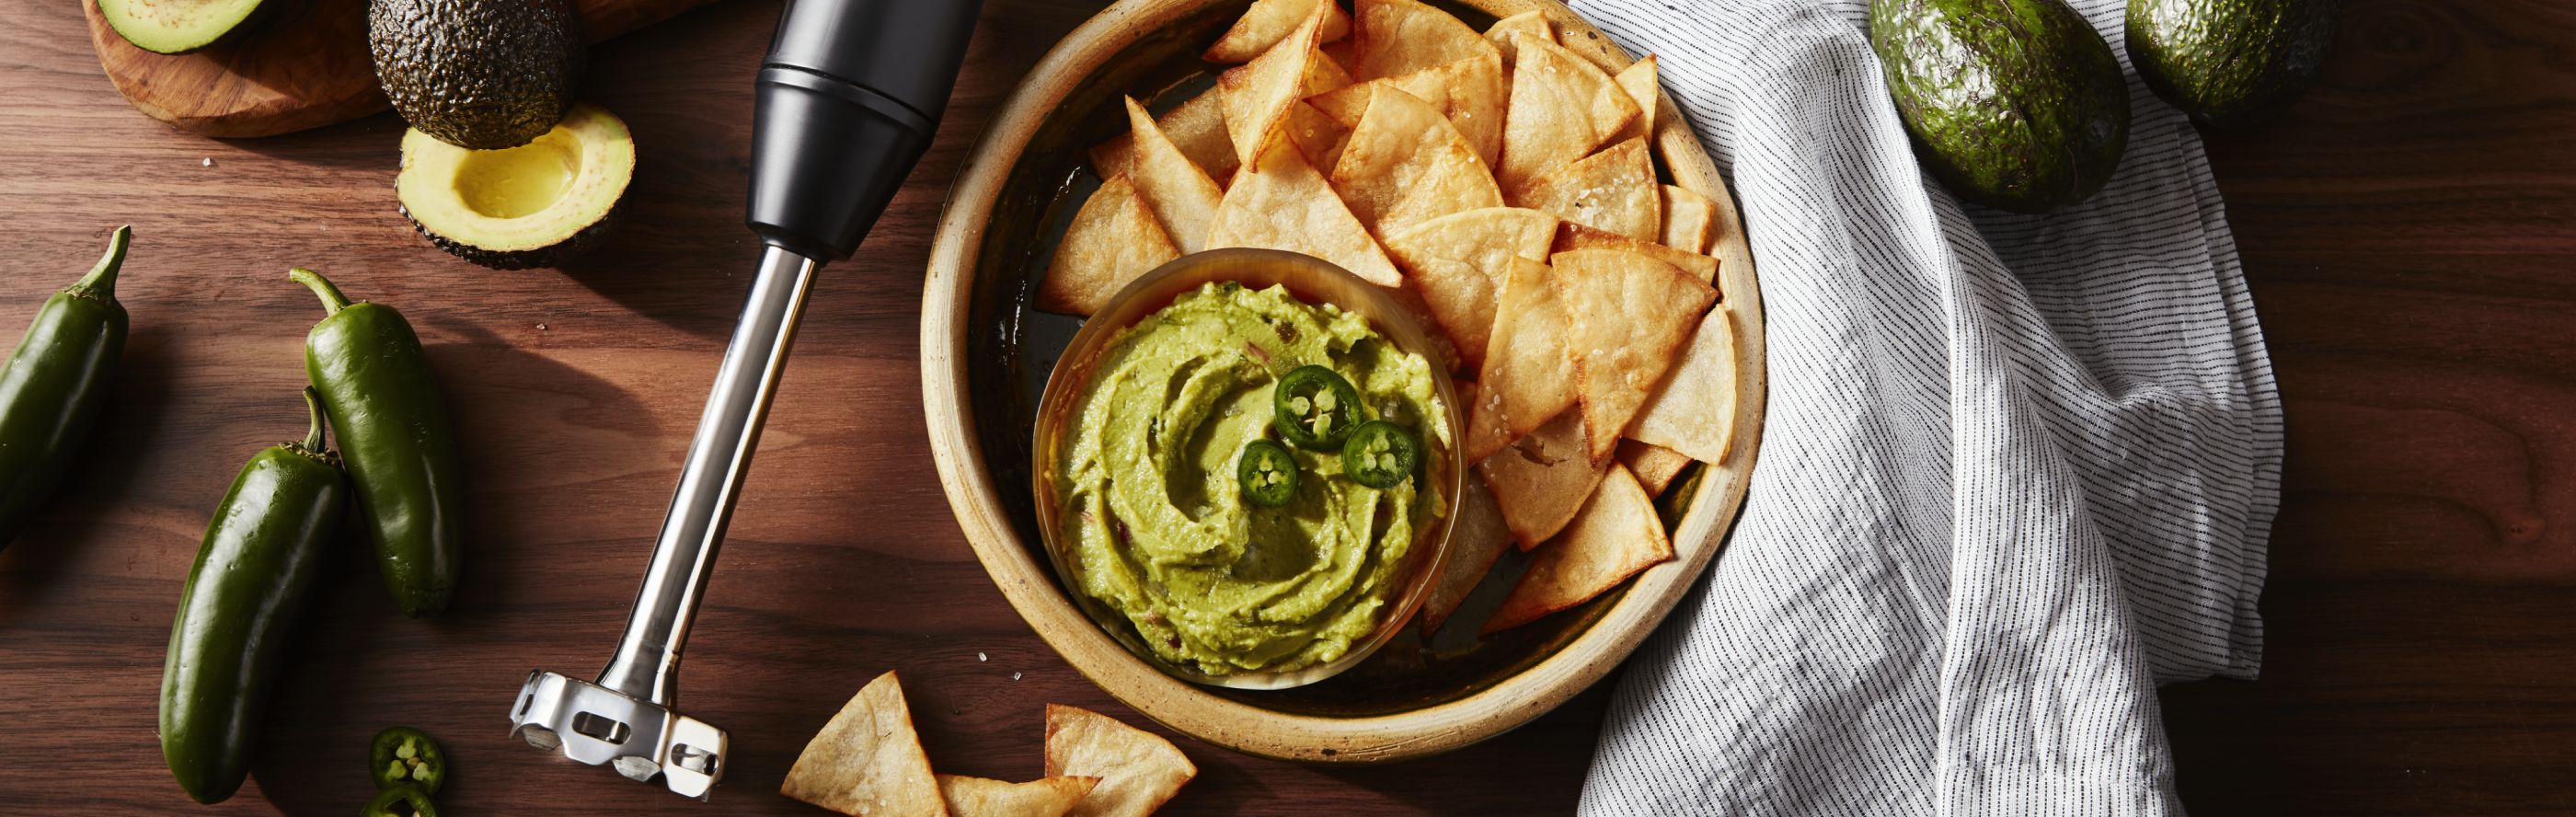 Guacamole and chips next to KitchenAid® hand blender